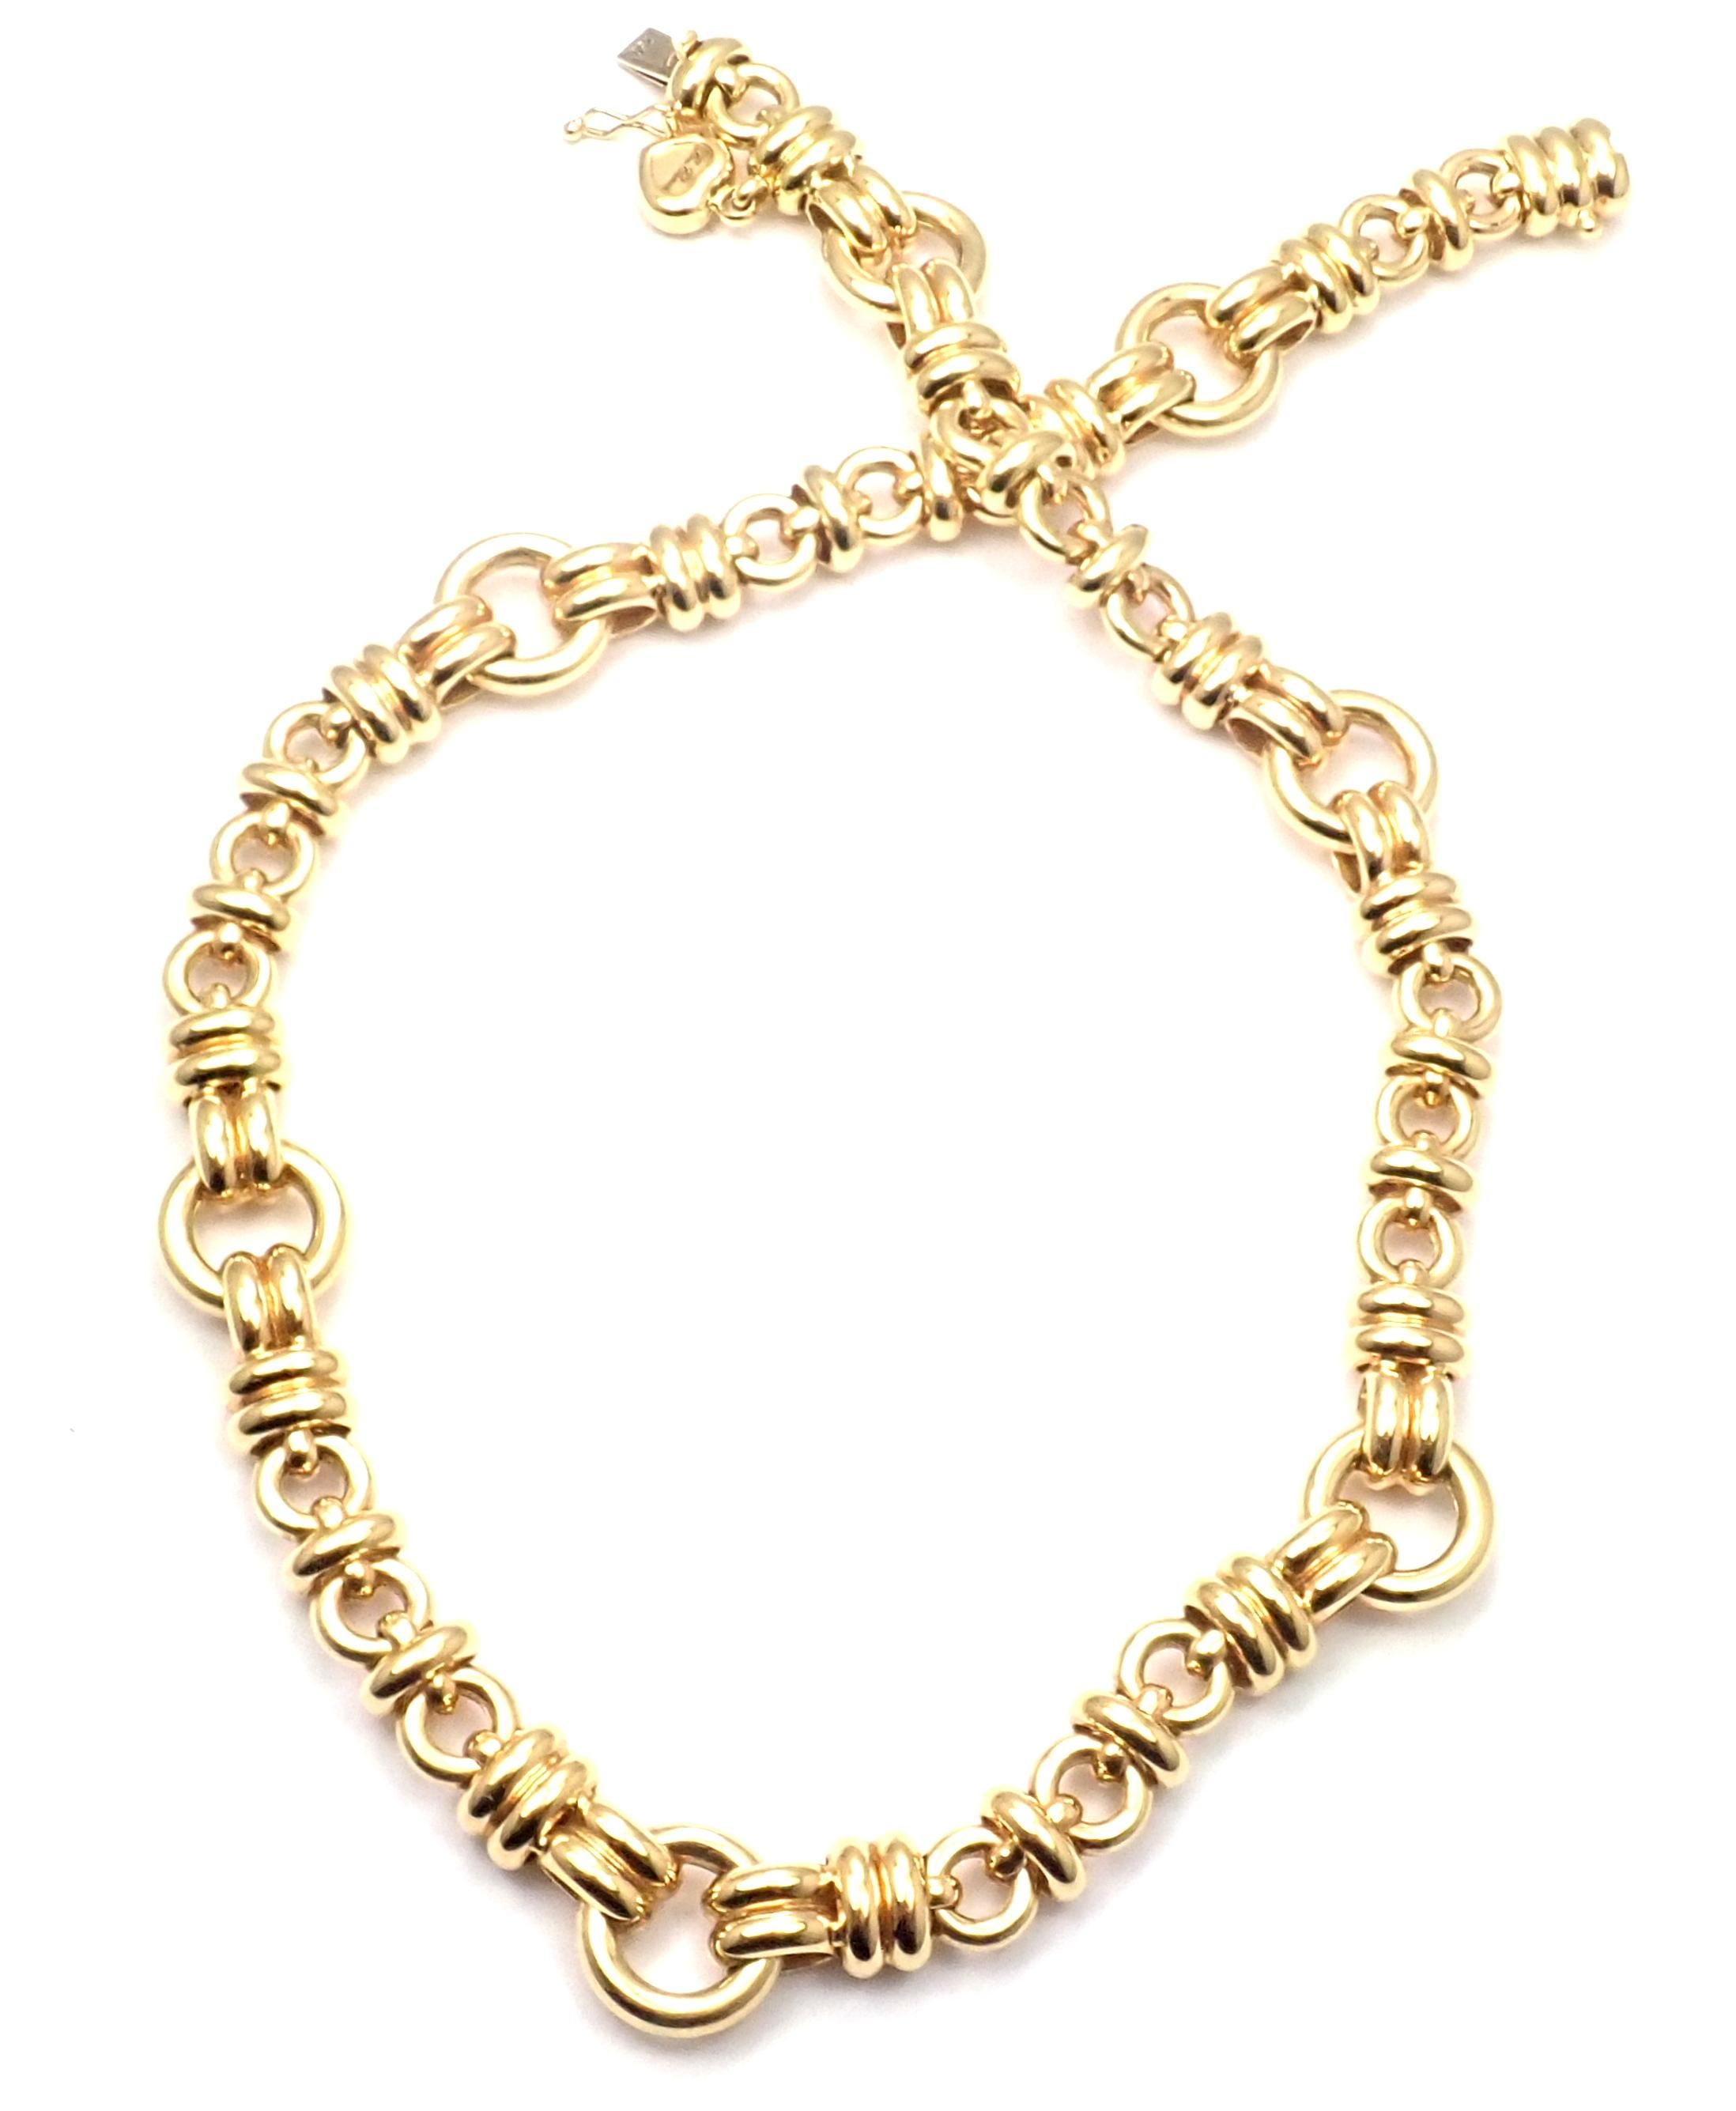 Women's or Men's Chopard Les Chaines Yellow Gold Link Necklace For Sale